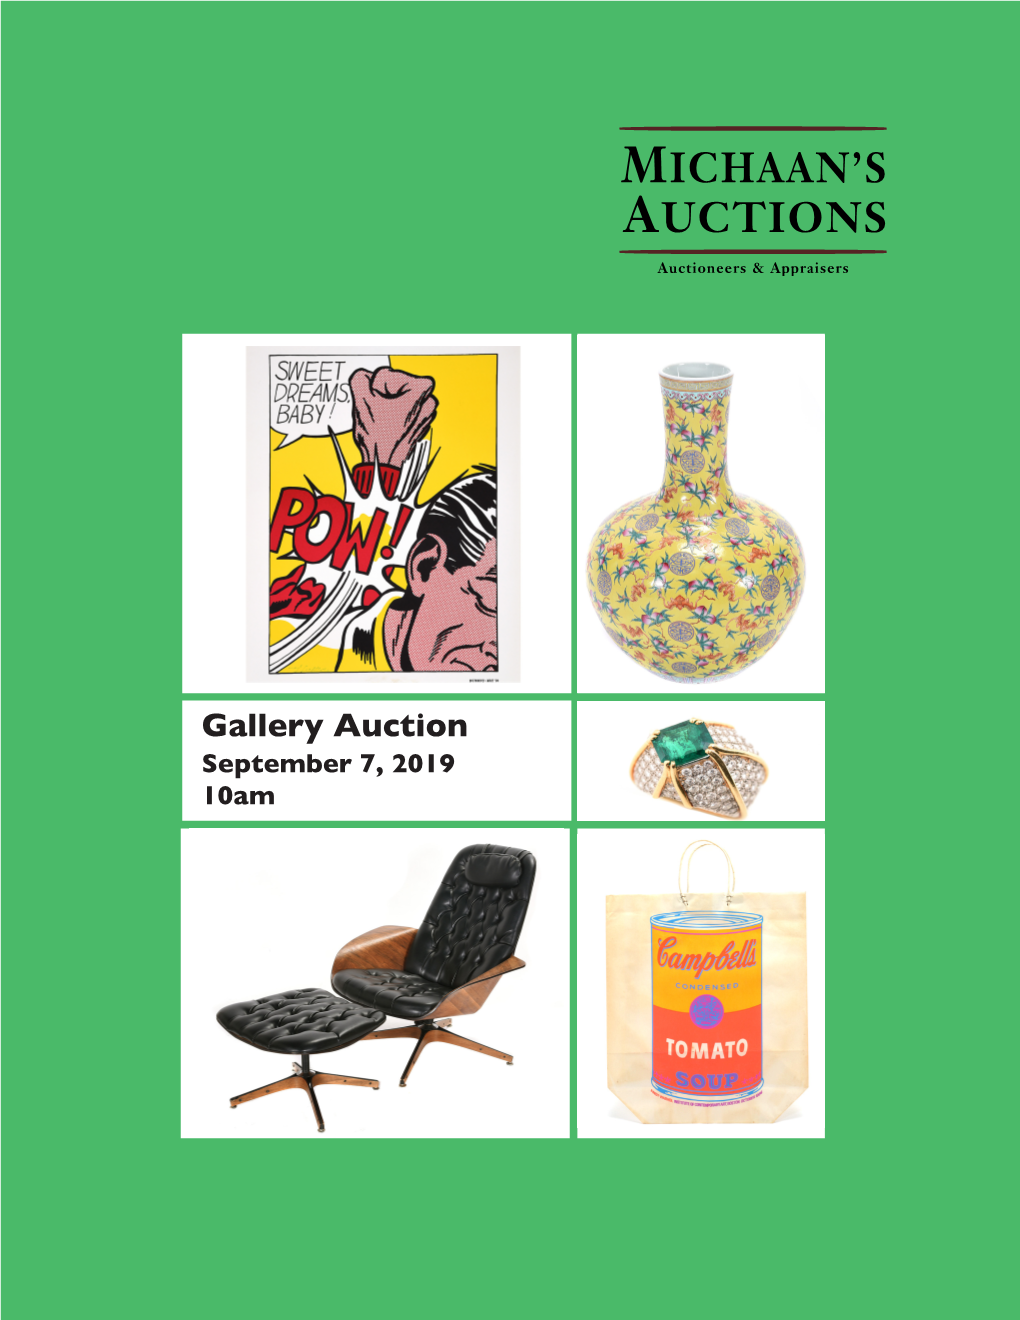 Gallery Auction September 7, 2019 10Am Featuring Fine Art, Furniture, Decorative Arts, Asian Art & Gallery Auction Jewelry